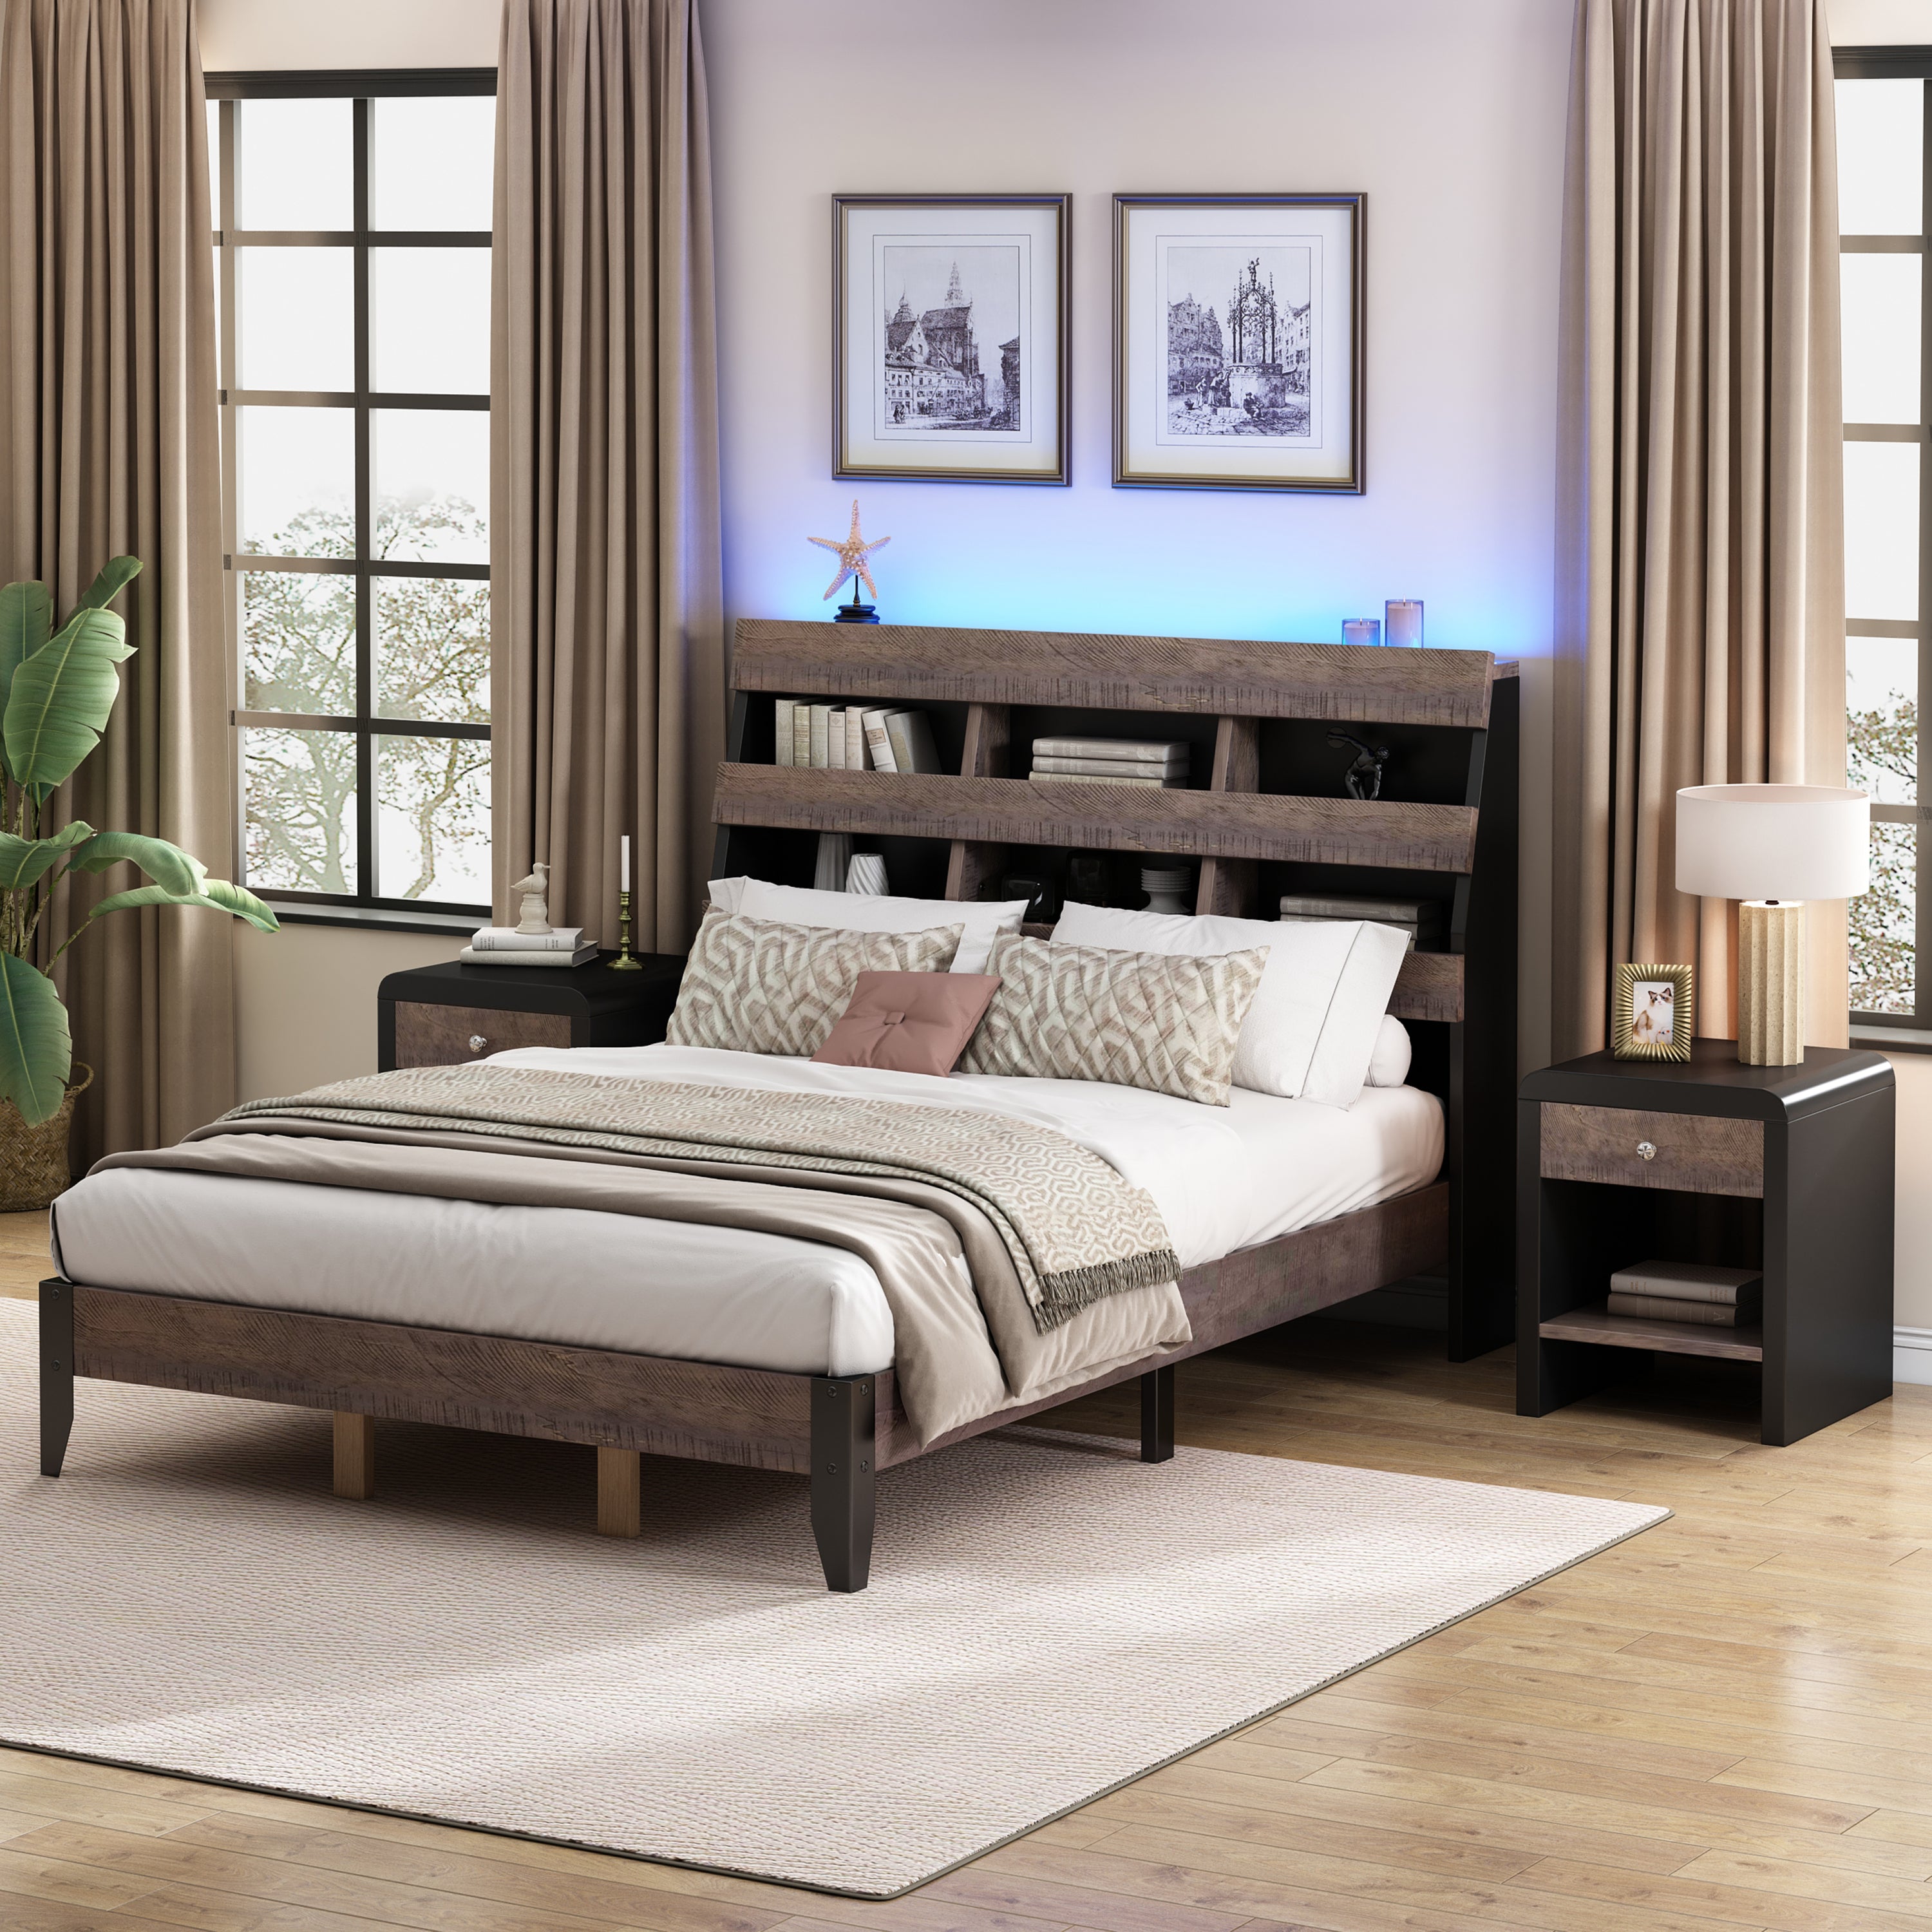 Mid Century Modern Style Queen Bed Frame with Bookshelf and LED Lights and USB Port